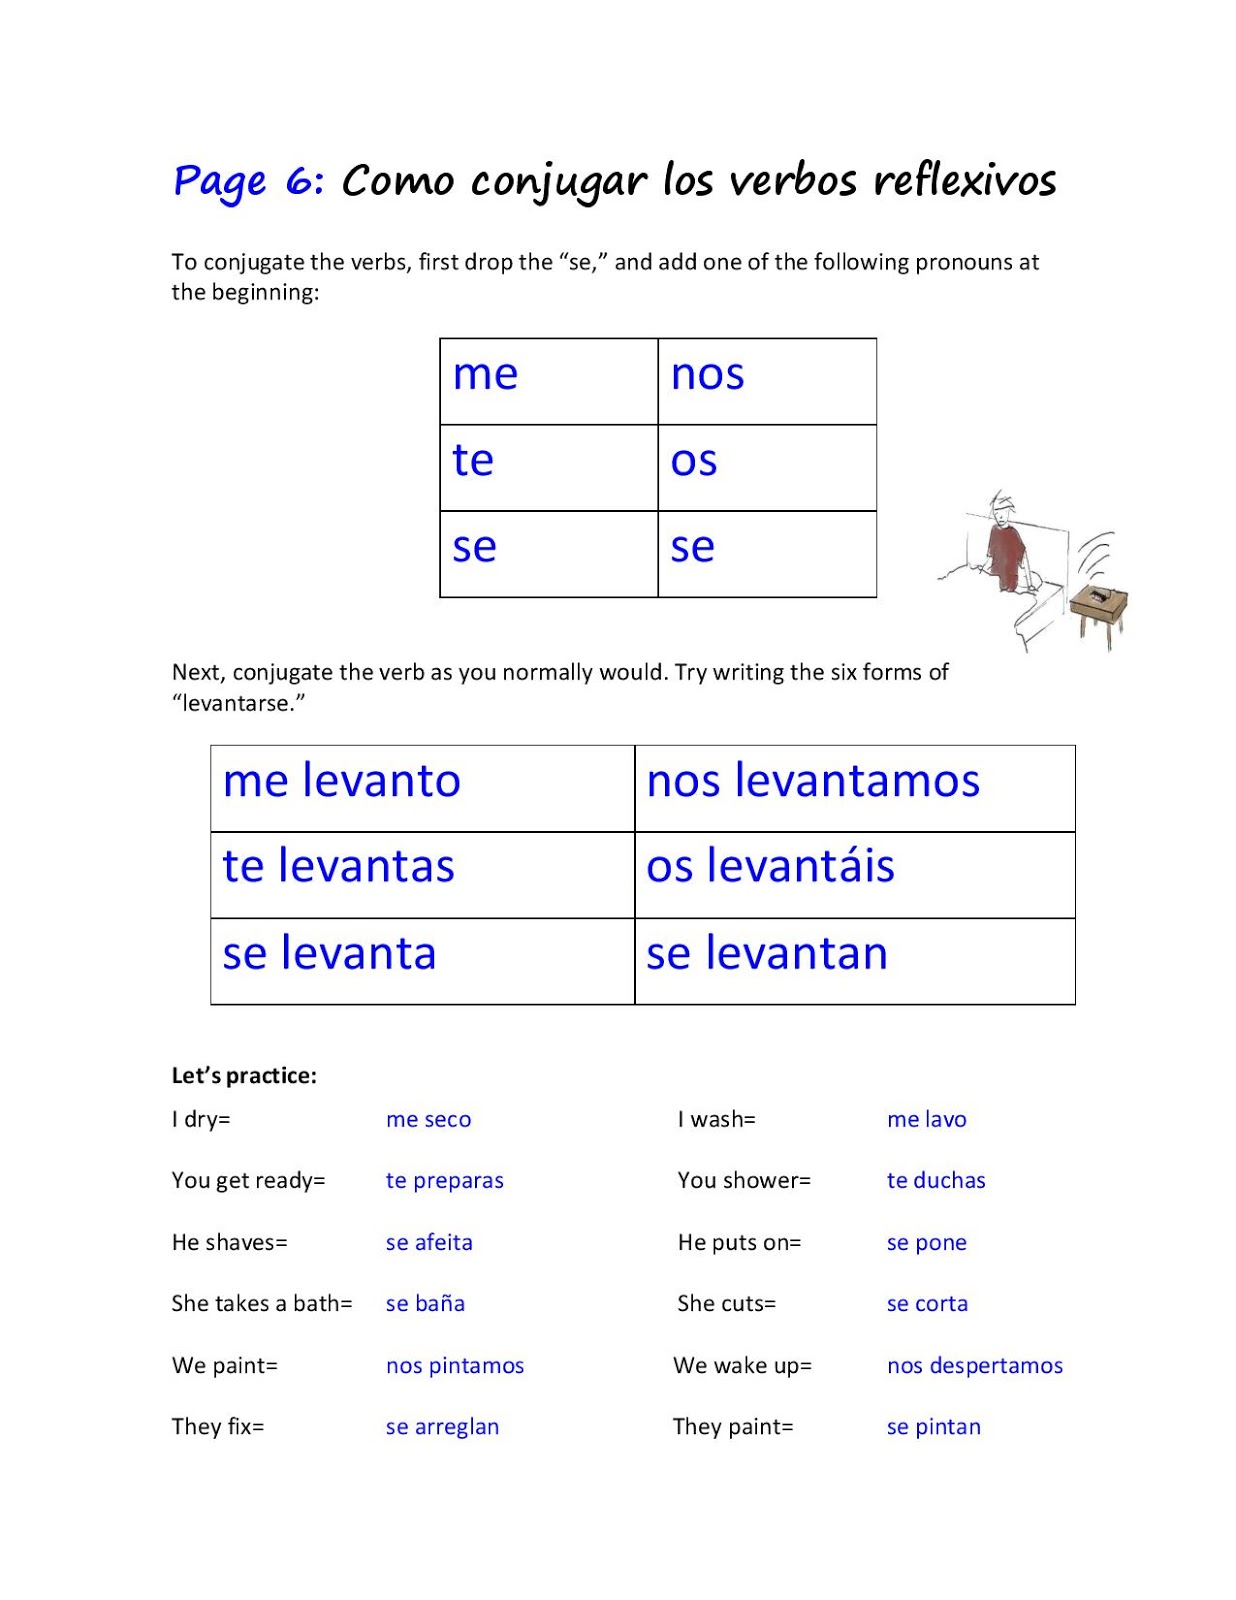 clases-de-espa-ol-answer-key-on-packet-given-tuesday-08-2015